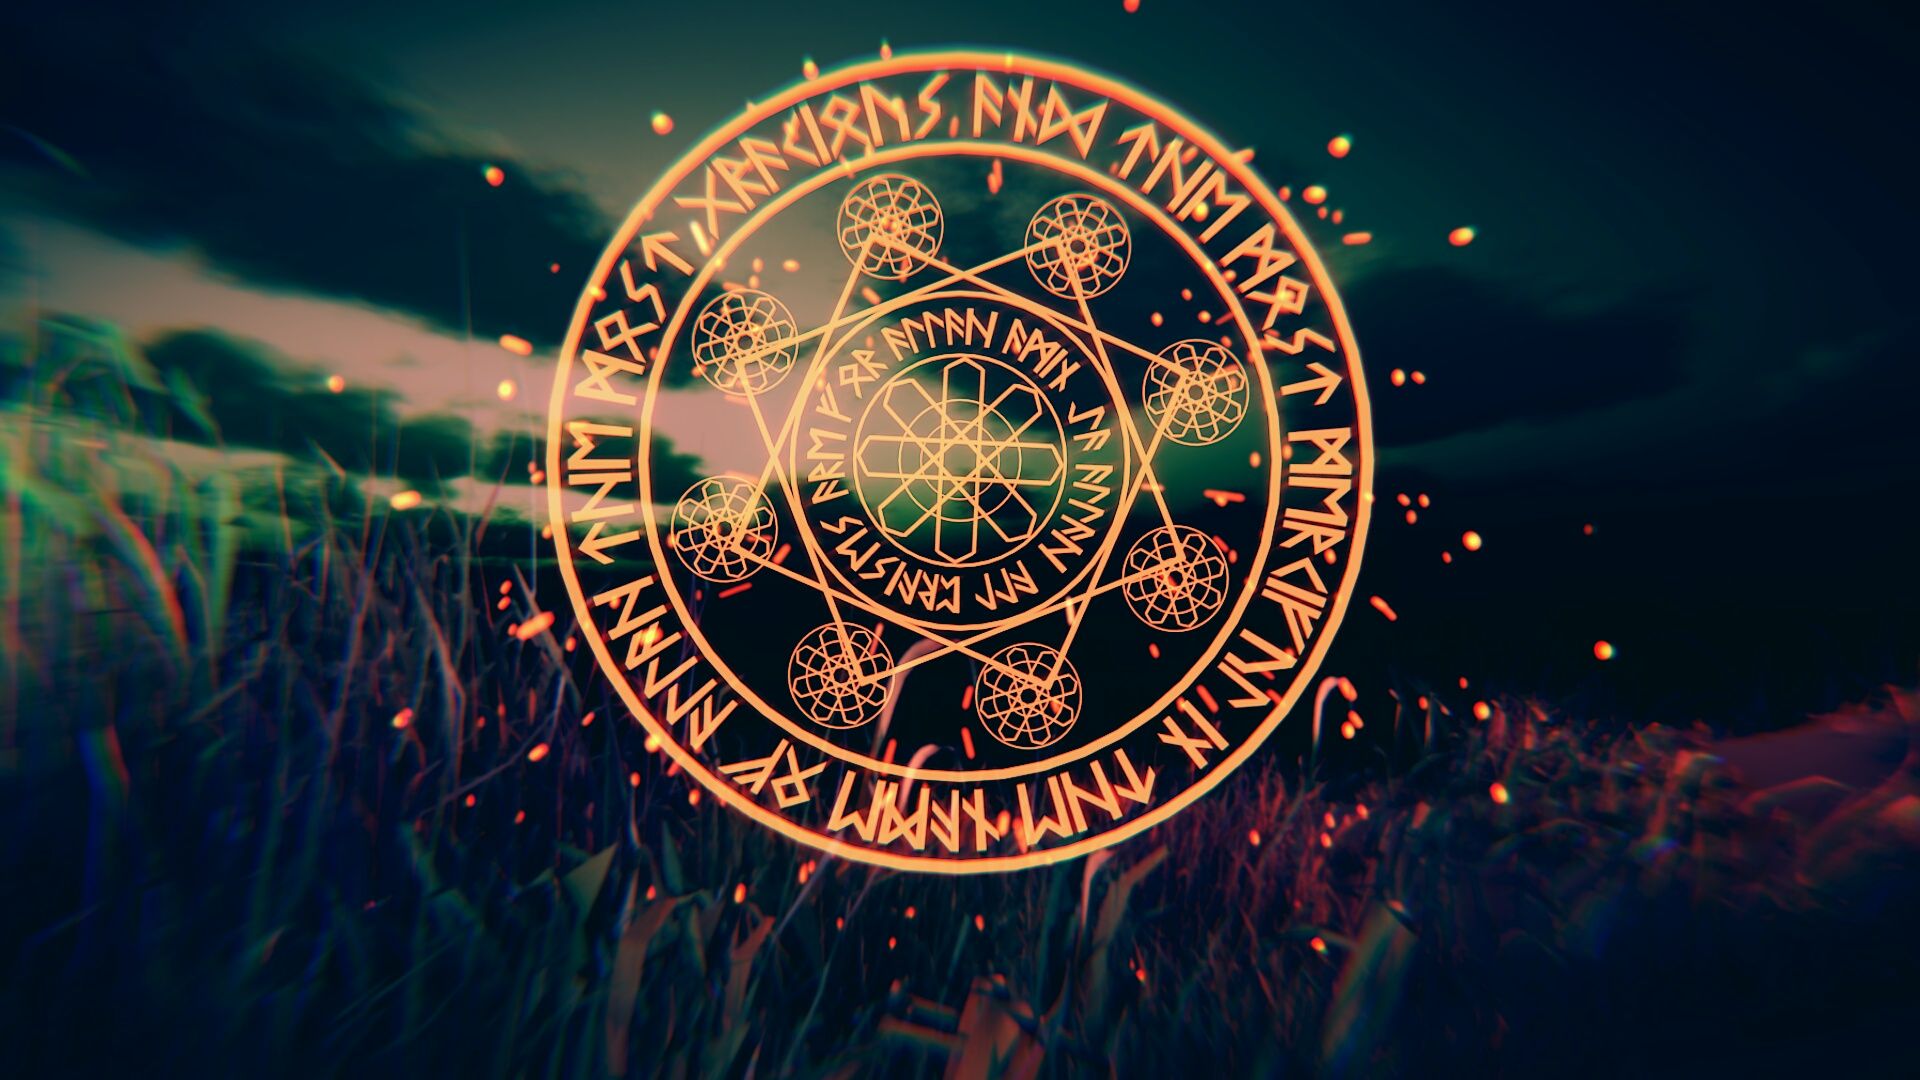 I made this magic circle inspired by Doctor Strange movie, any